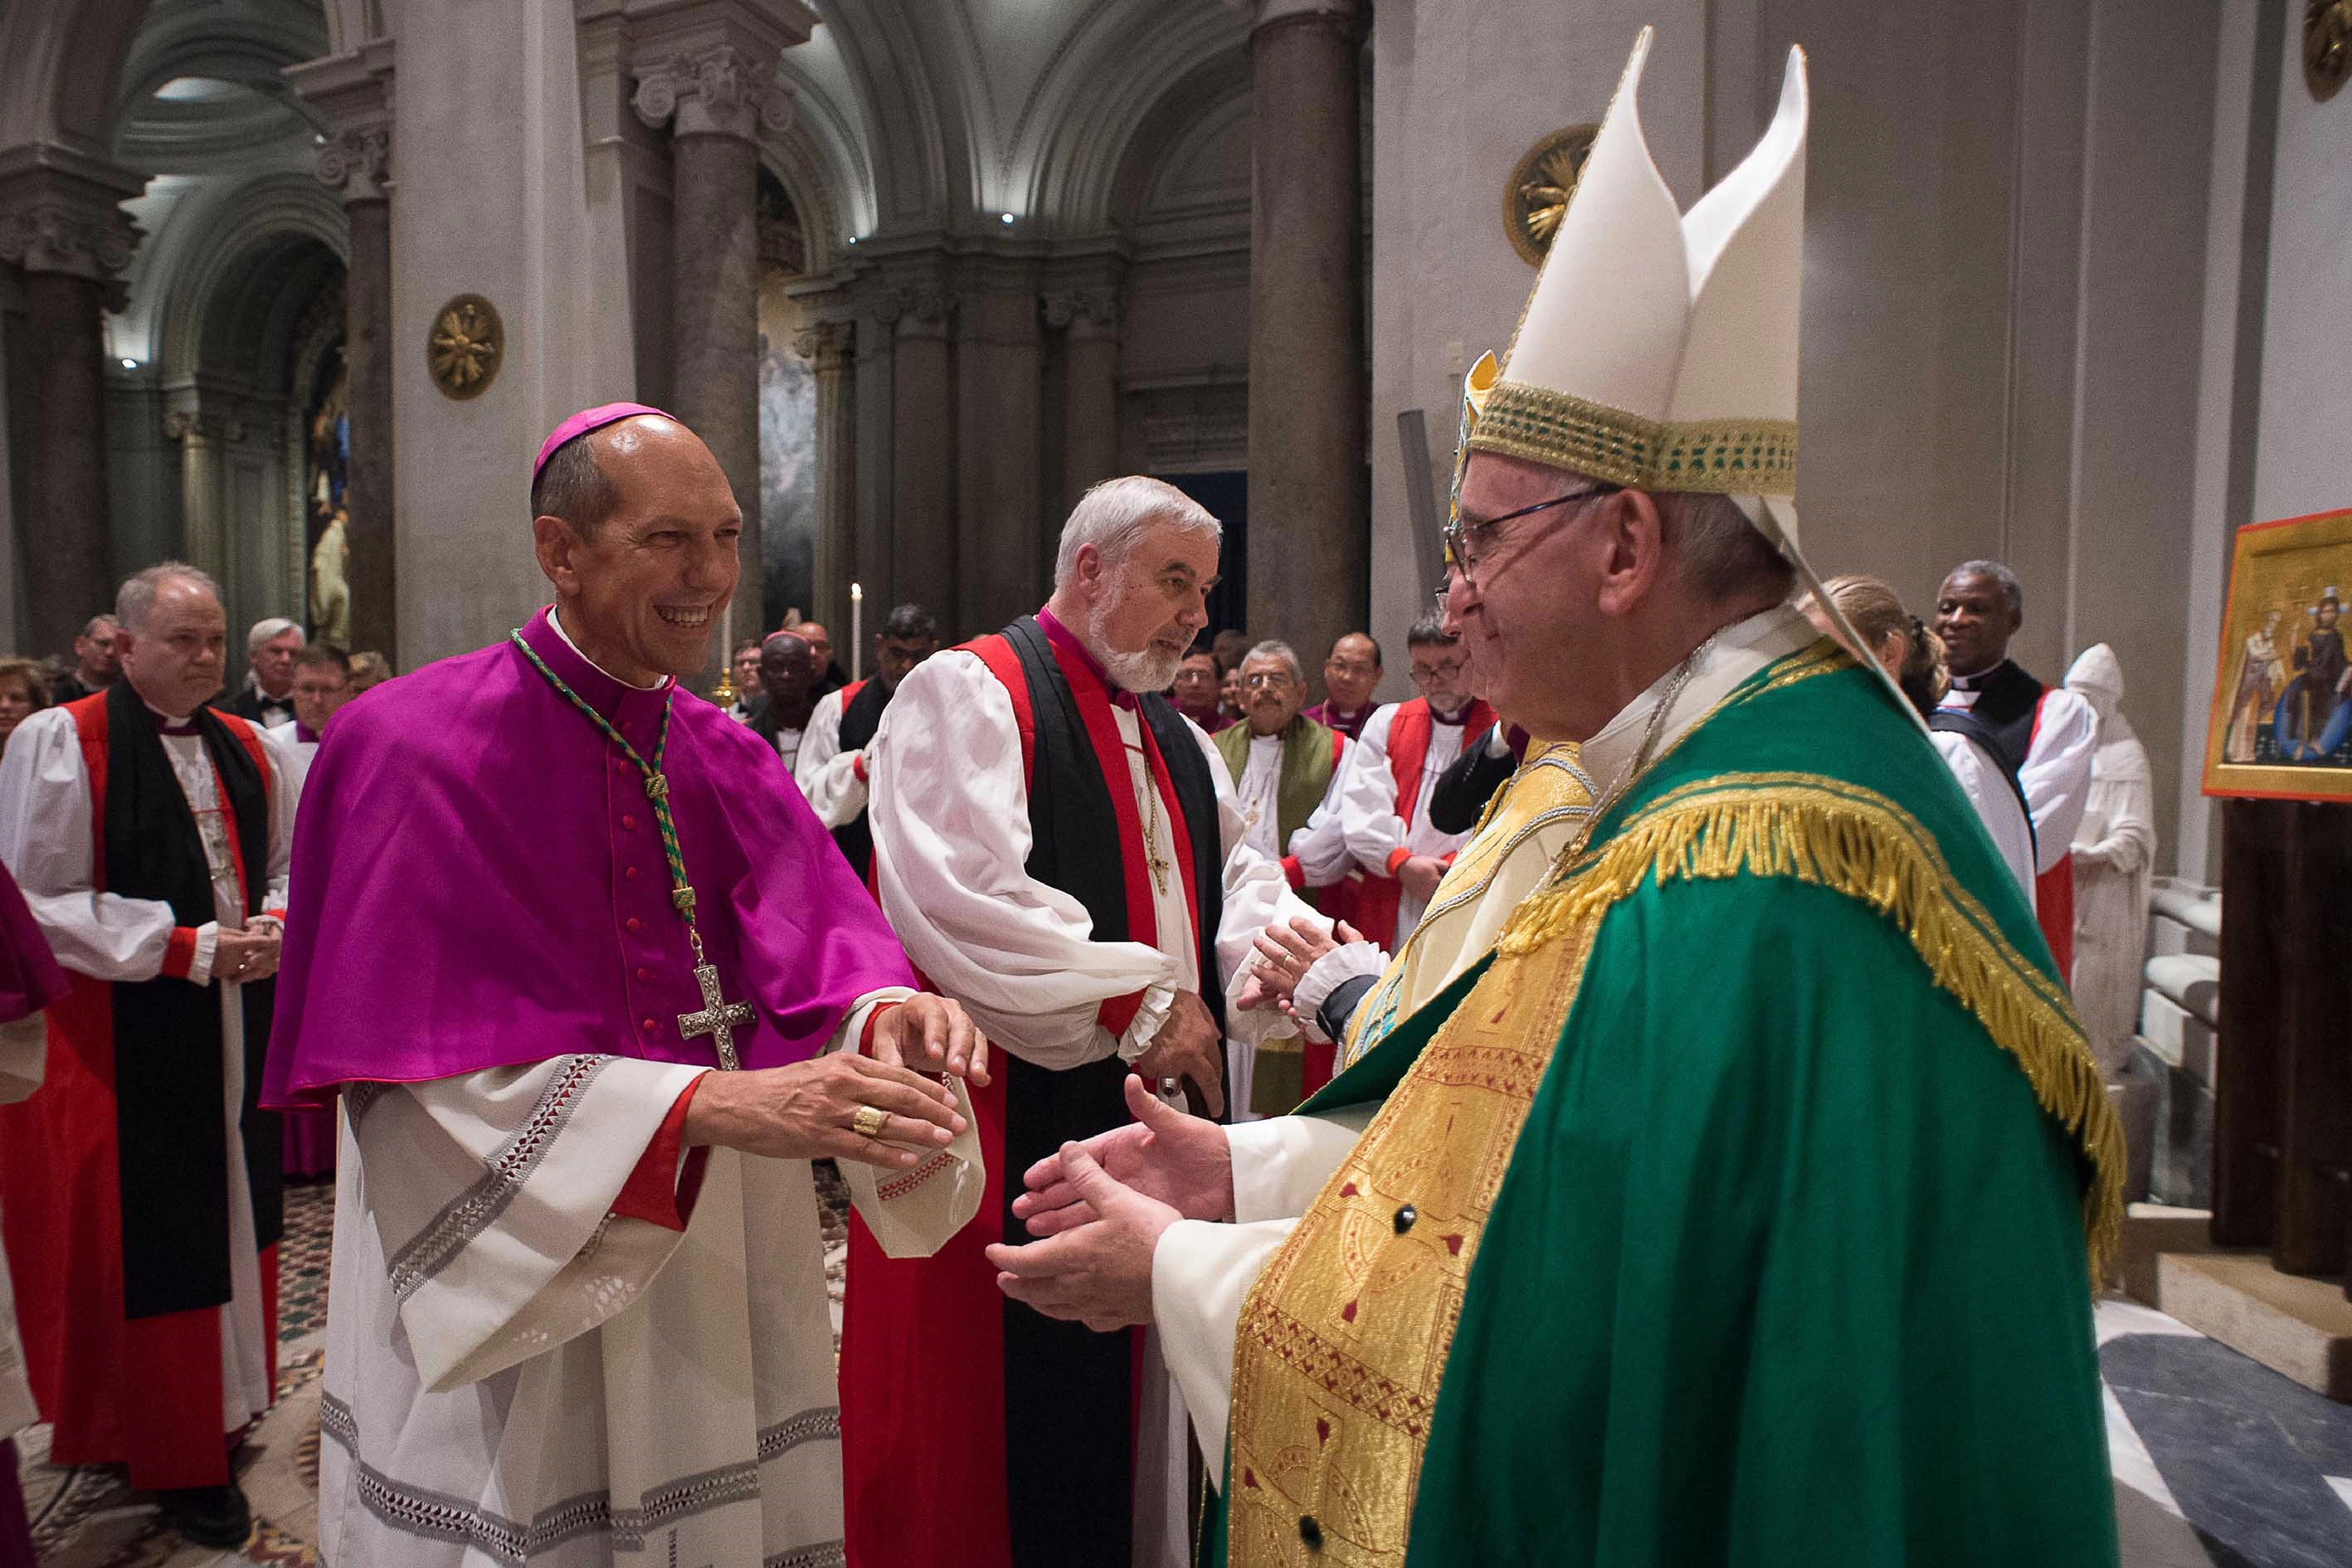 Archbishop Donald Bolen of Regina was commissioned by Pope Francis and Archbishop Justin Welby together with 19 pairs of Anglican and Roman Catholic bishops from around the world